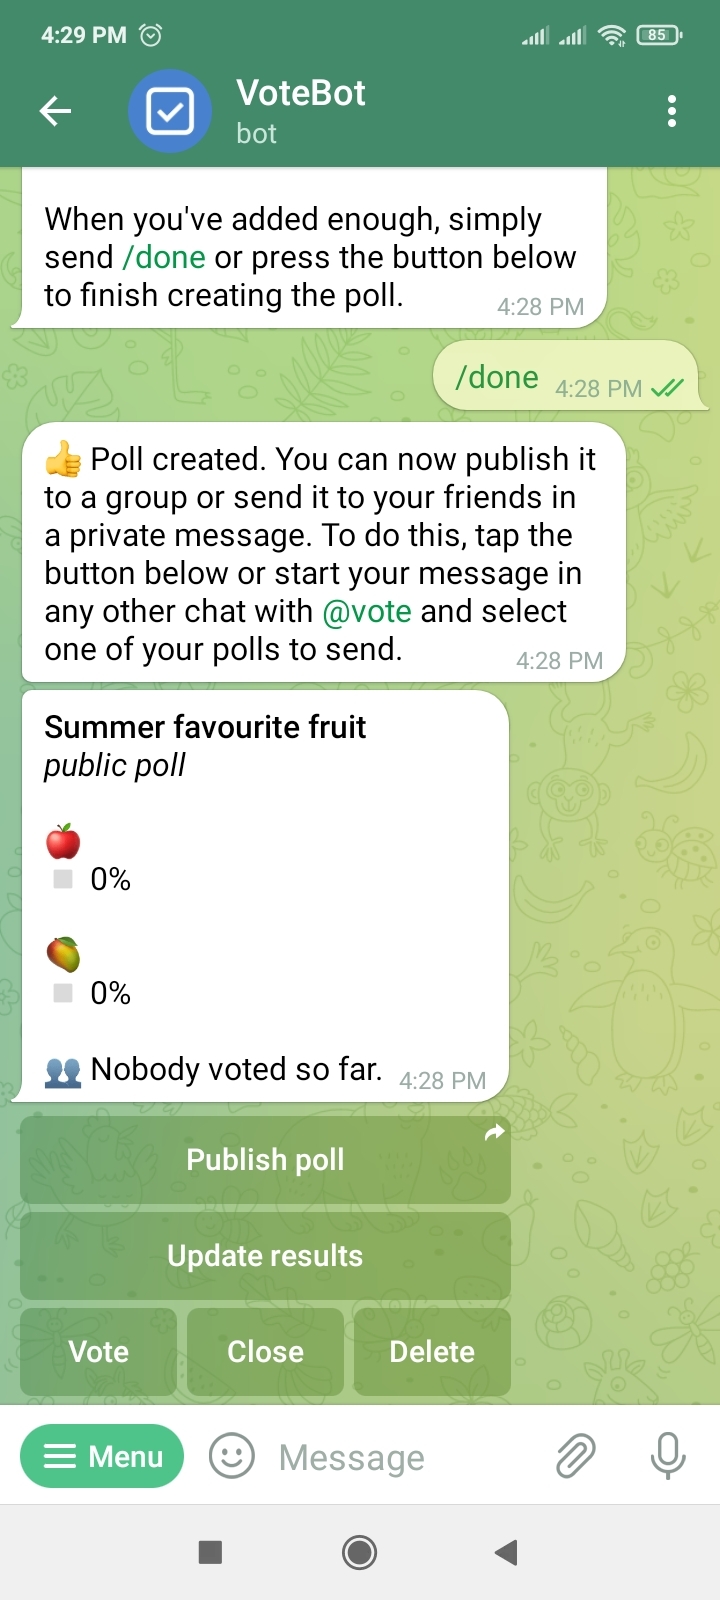 15 Top Telegram Tips and Tricks to Use it Like a Pro!